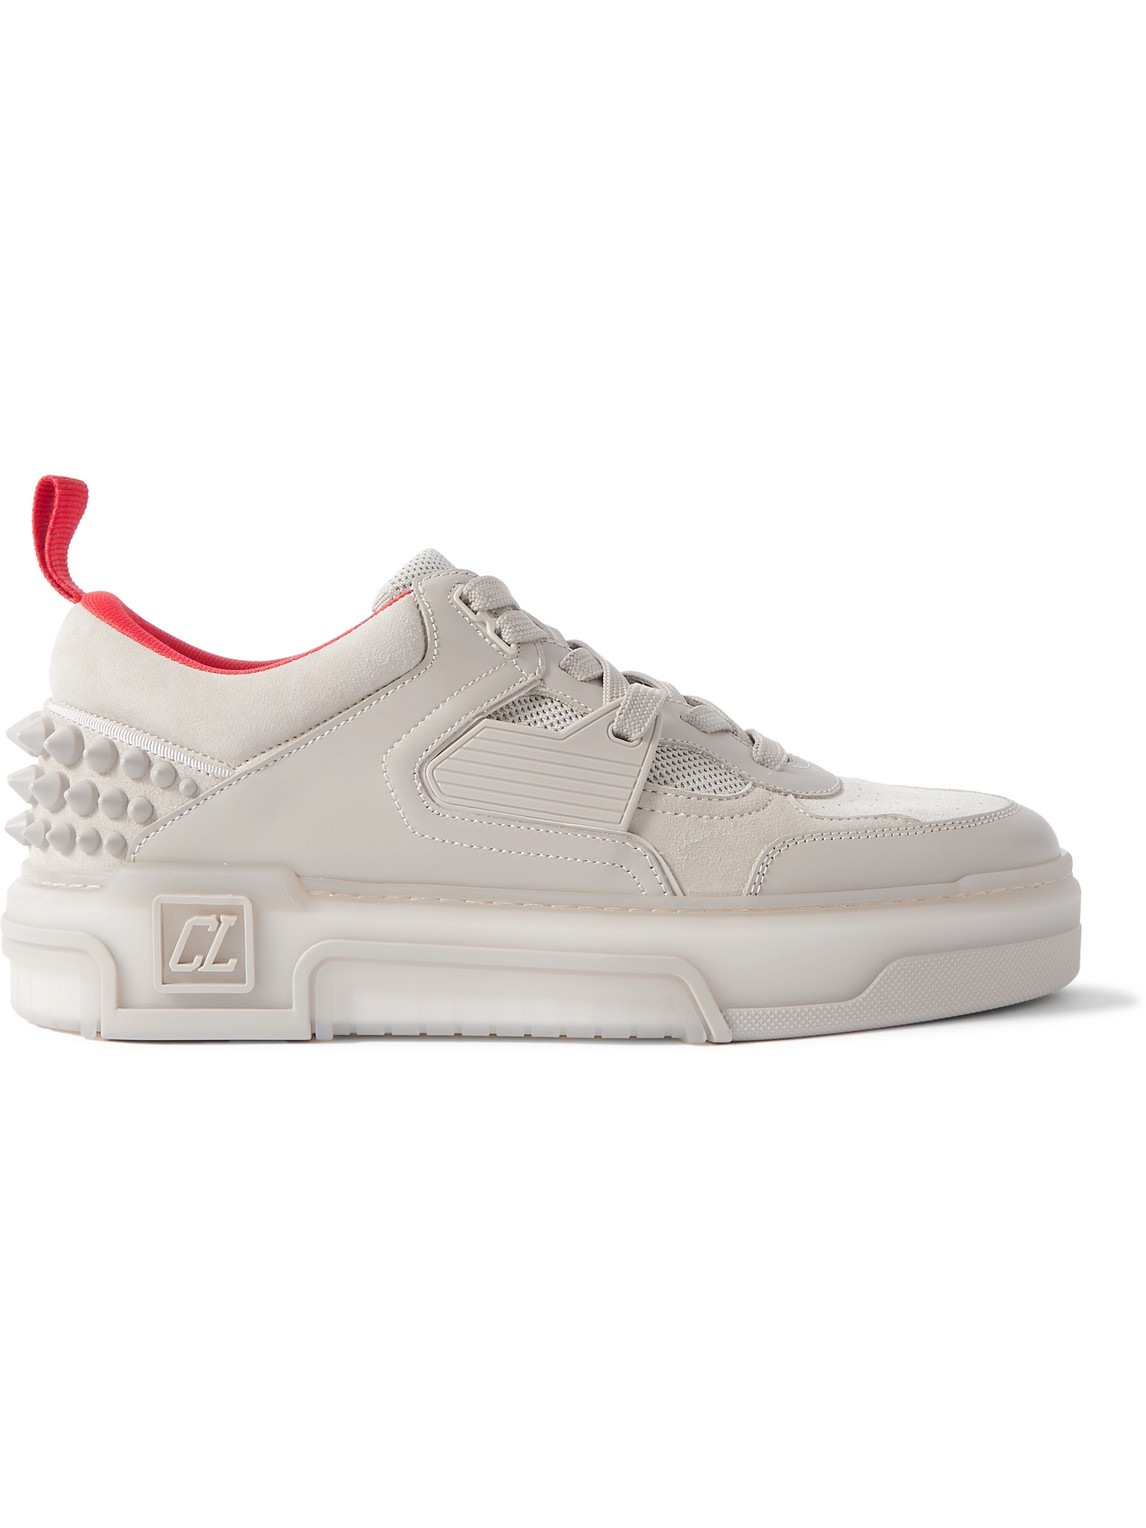 Christian Louboutin - Astroloubi Spiked Leather, Suede and Mesh Sneakers - Men - Neutrals - EU 42.5 von Christian Louboutin